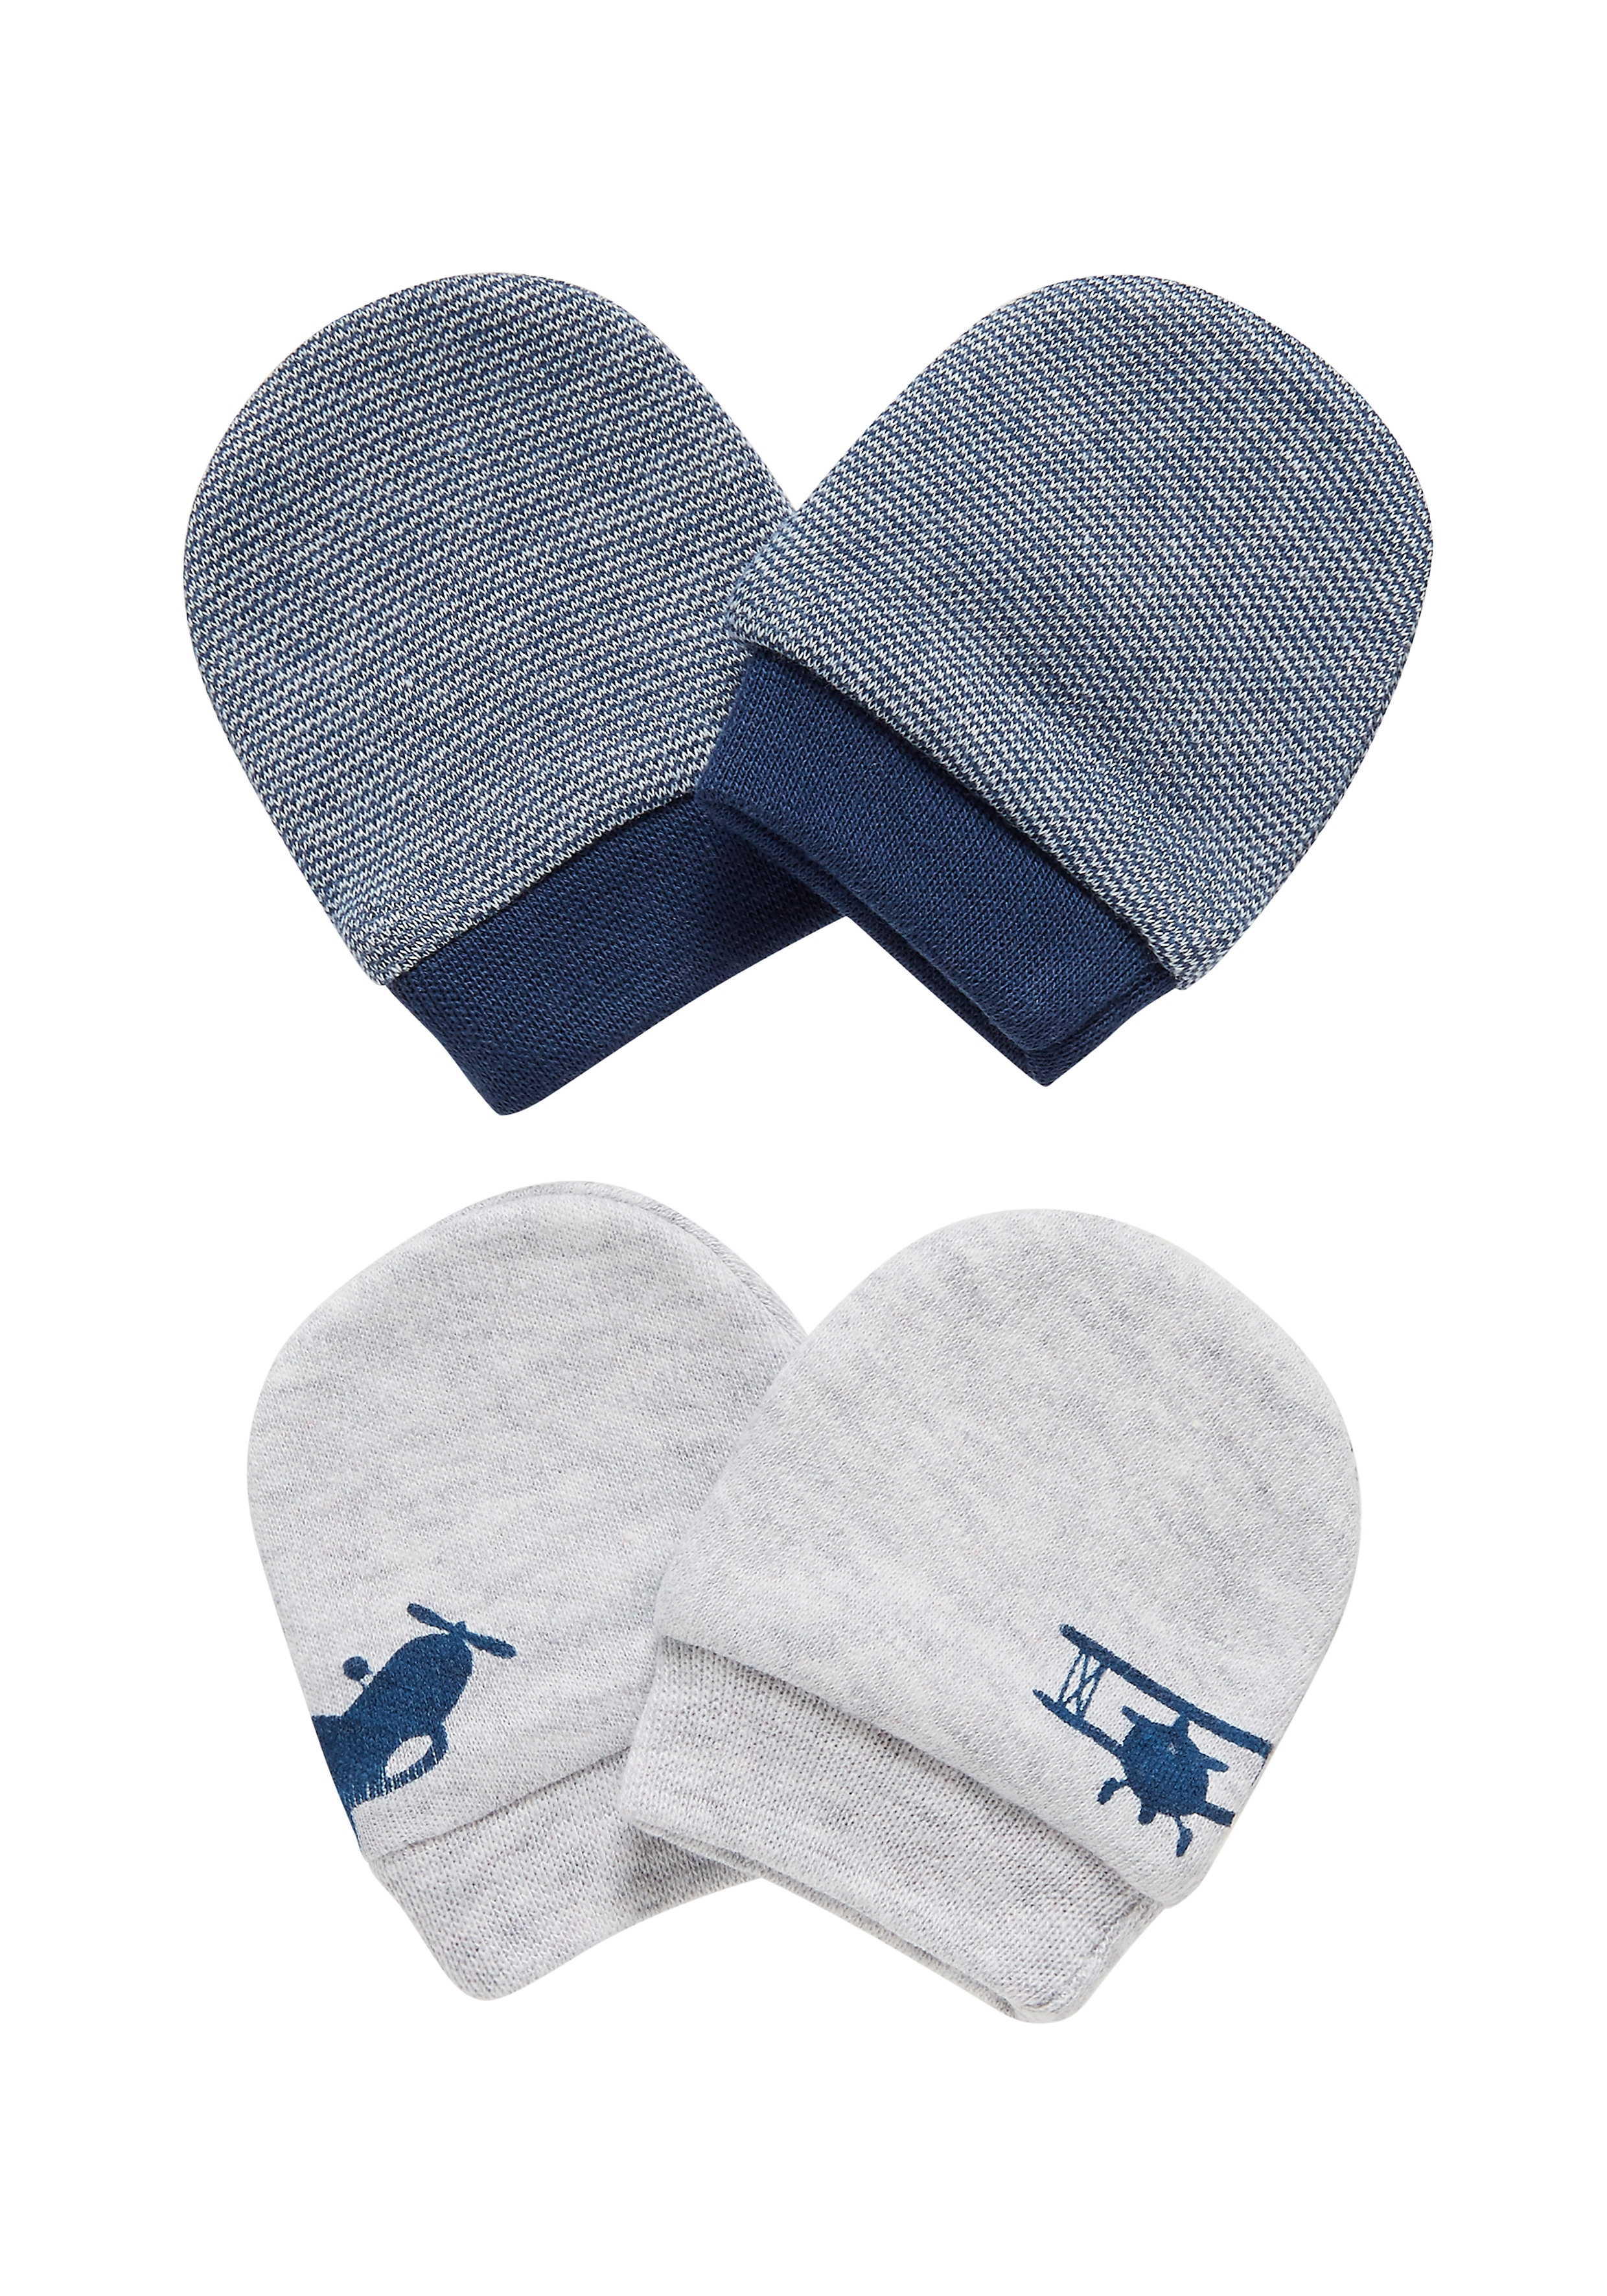 Mothercare | Boys Mitts Aeroplane Print - Pack Of 2 - Navy